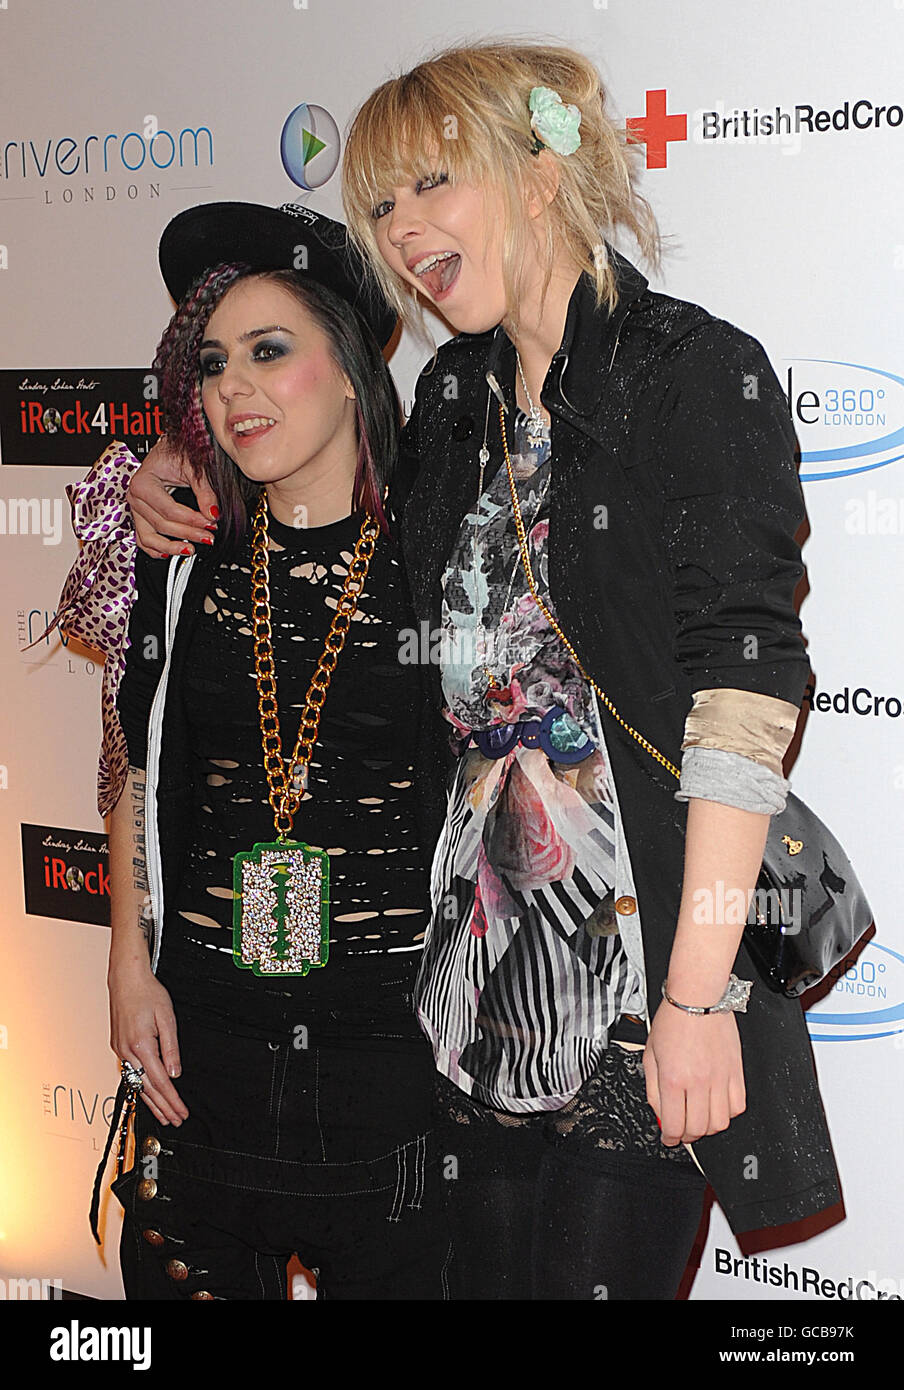 Lady Sovereign (left) and Katia Ivanova arrive for Lohan's Brits 4 Haiti party at Altitude in south west London. Stock Photo